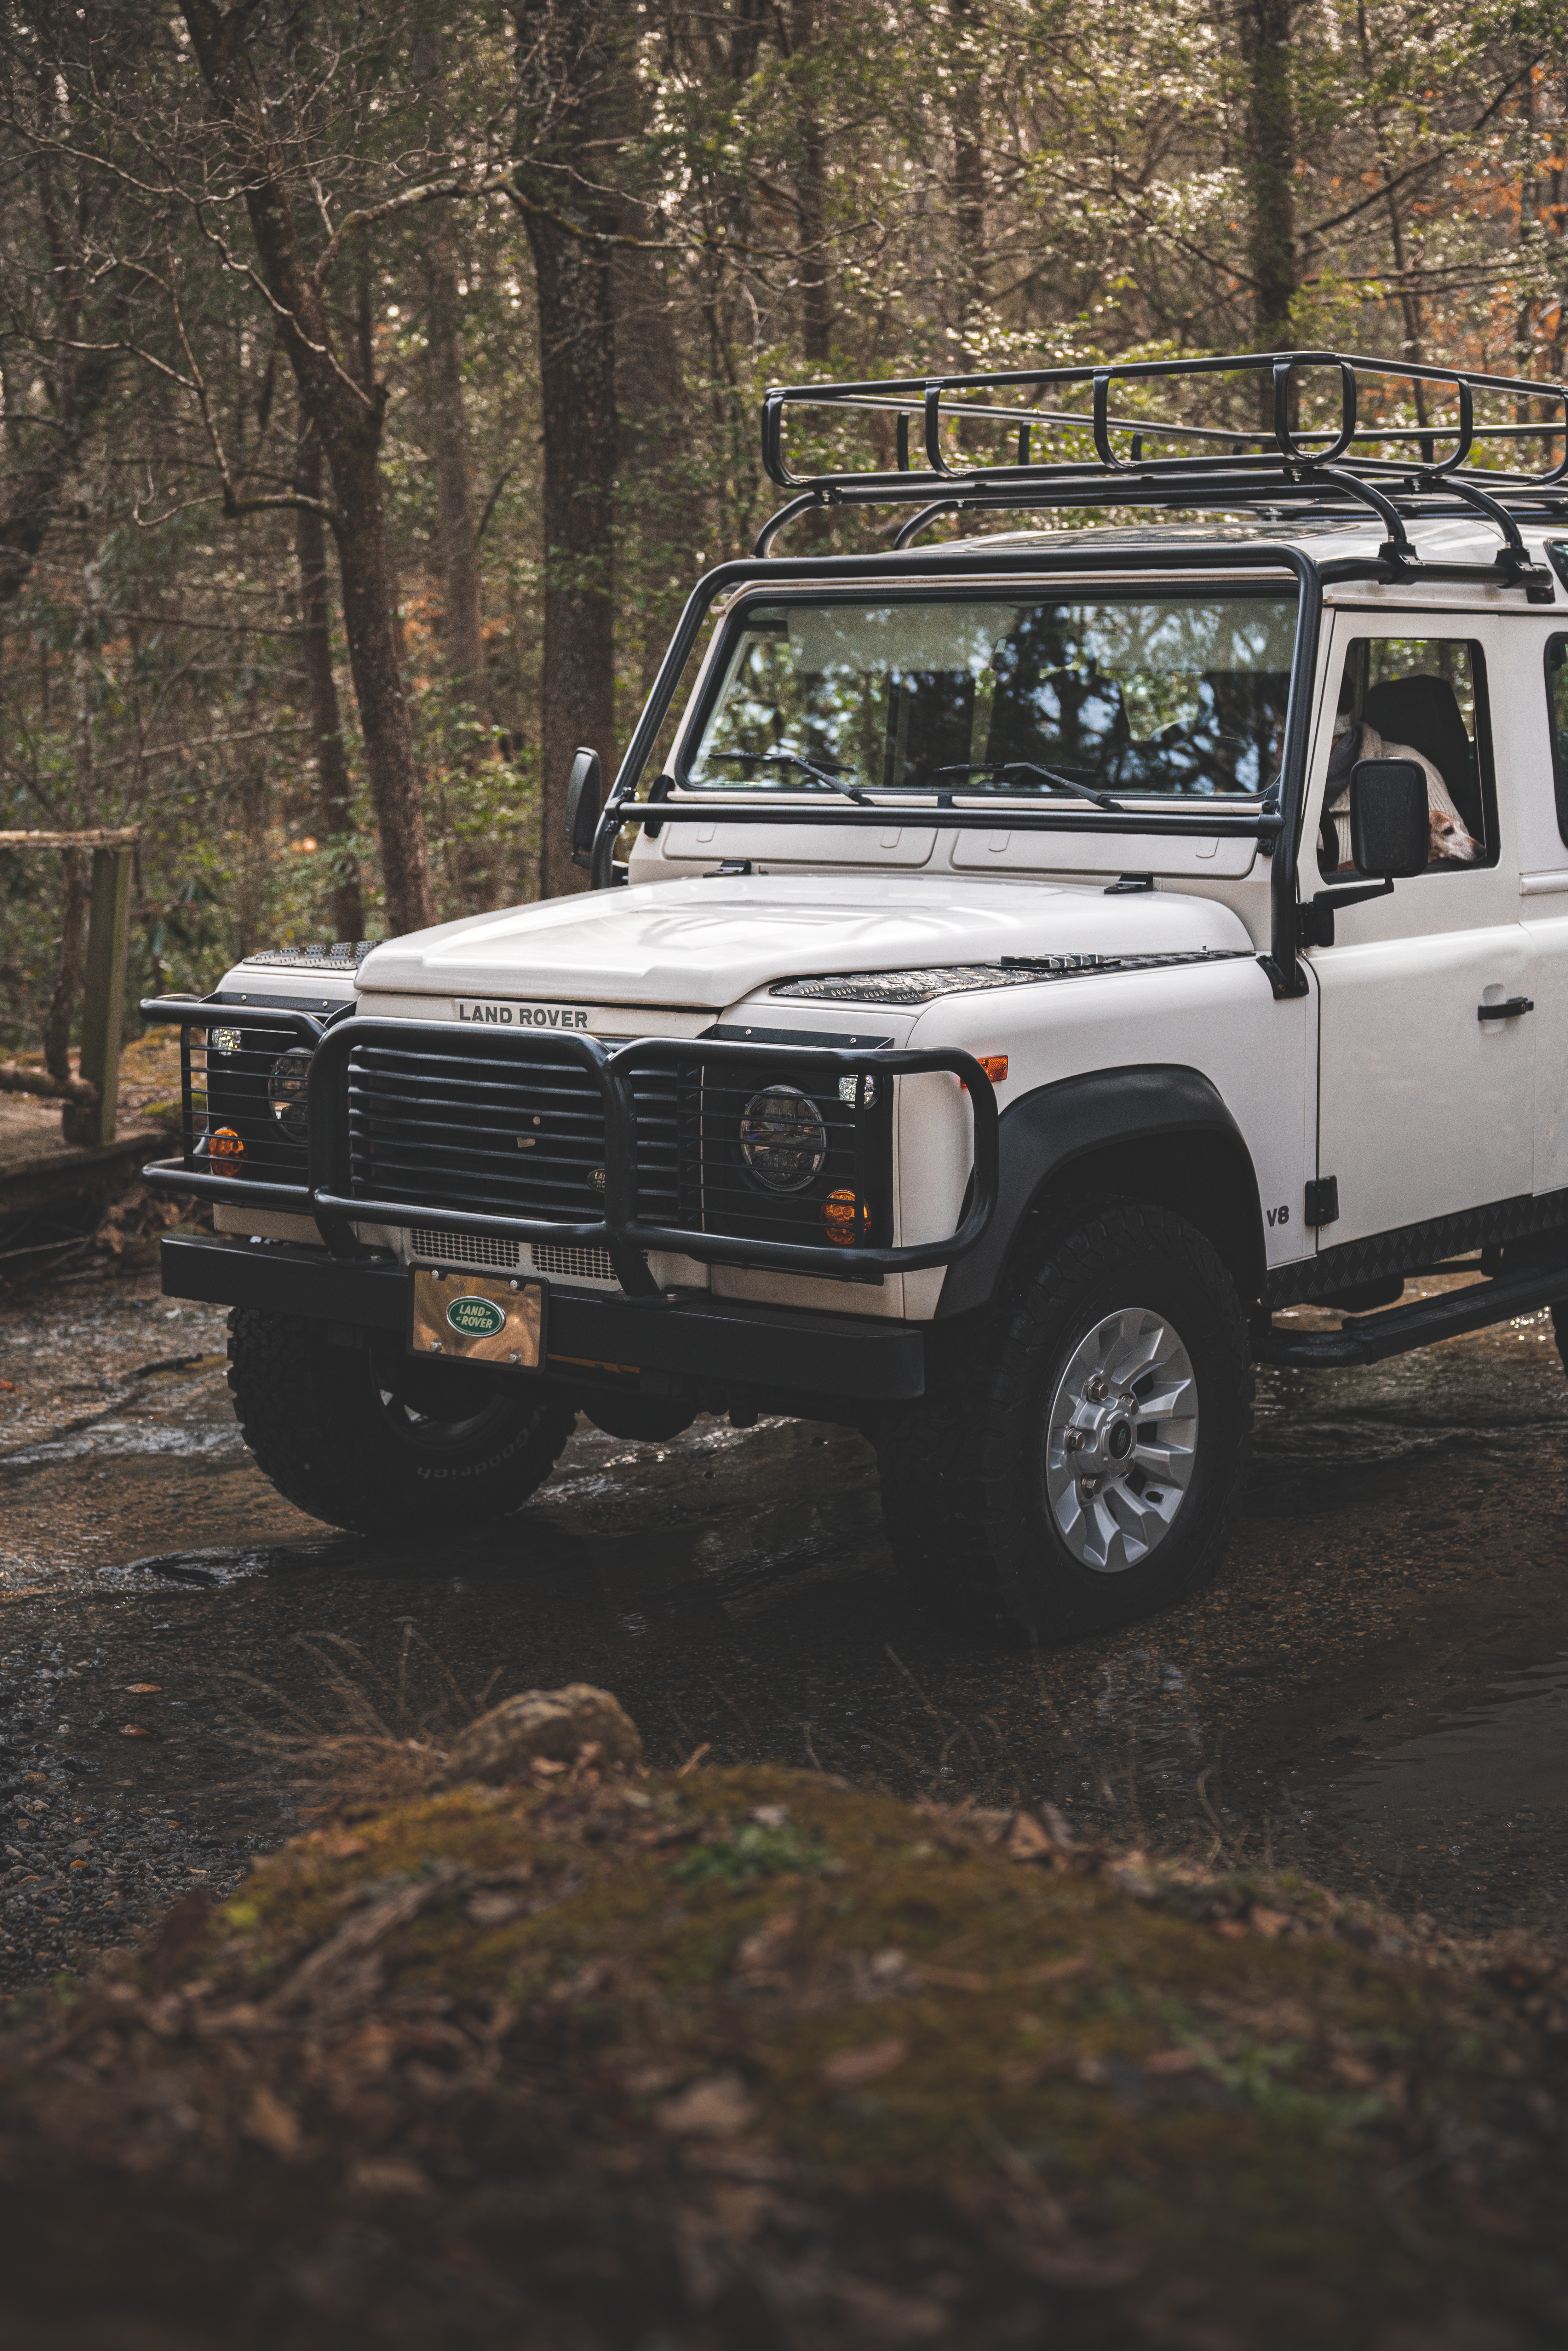 land rover, cars, white, car, suv, jeep, machine, land rover defender